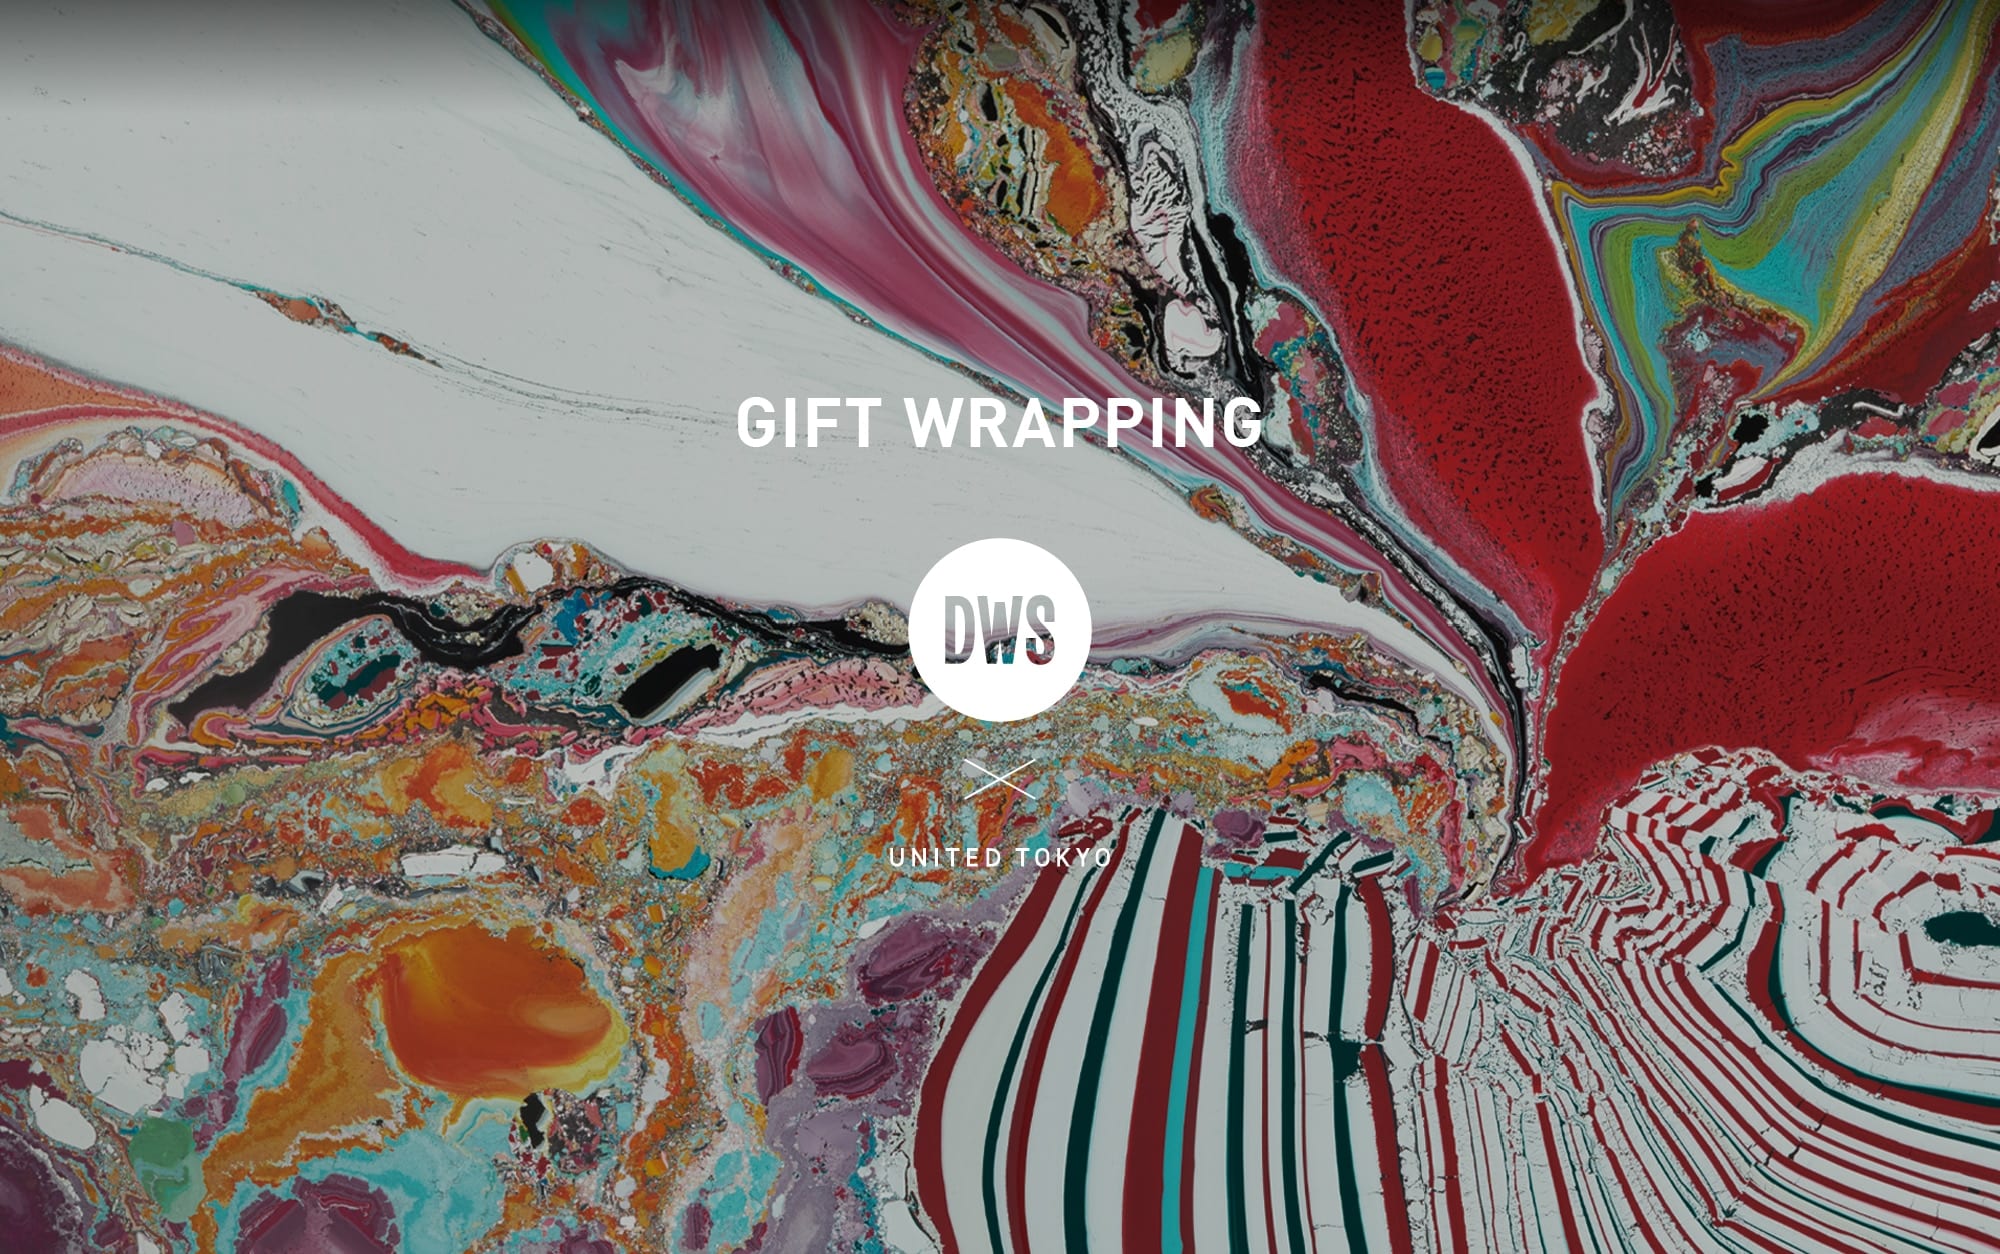 DWS × UNITEDTOKYO GIFT WRAPPING｜UNITED TOKYO ONLINE STORE